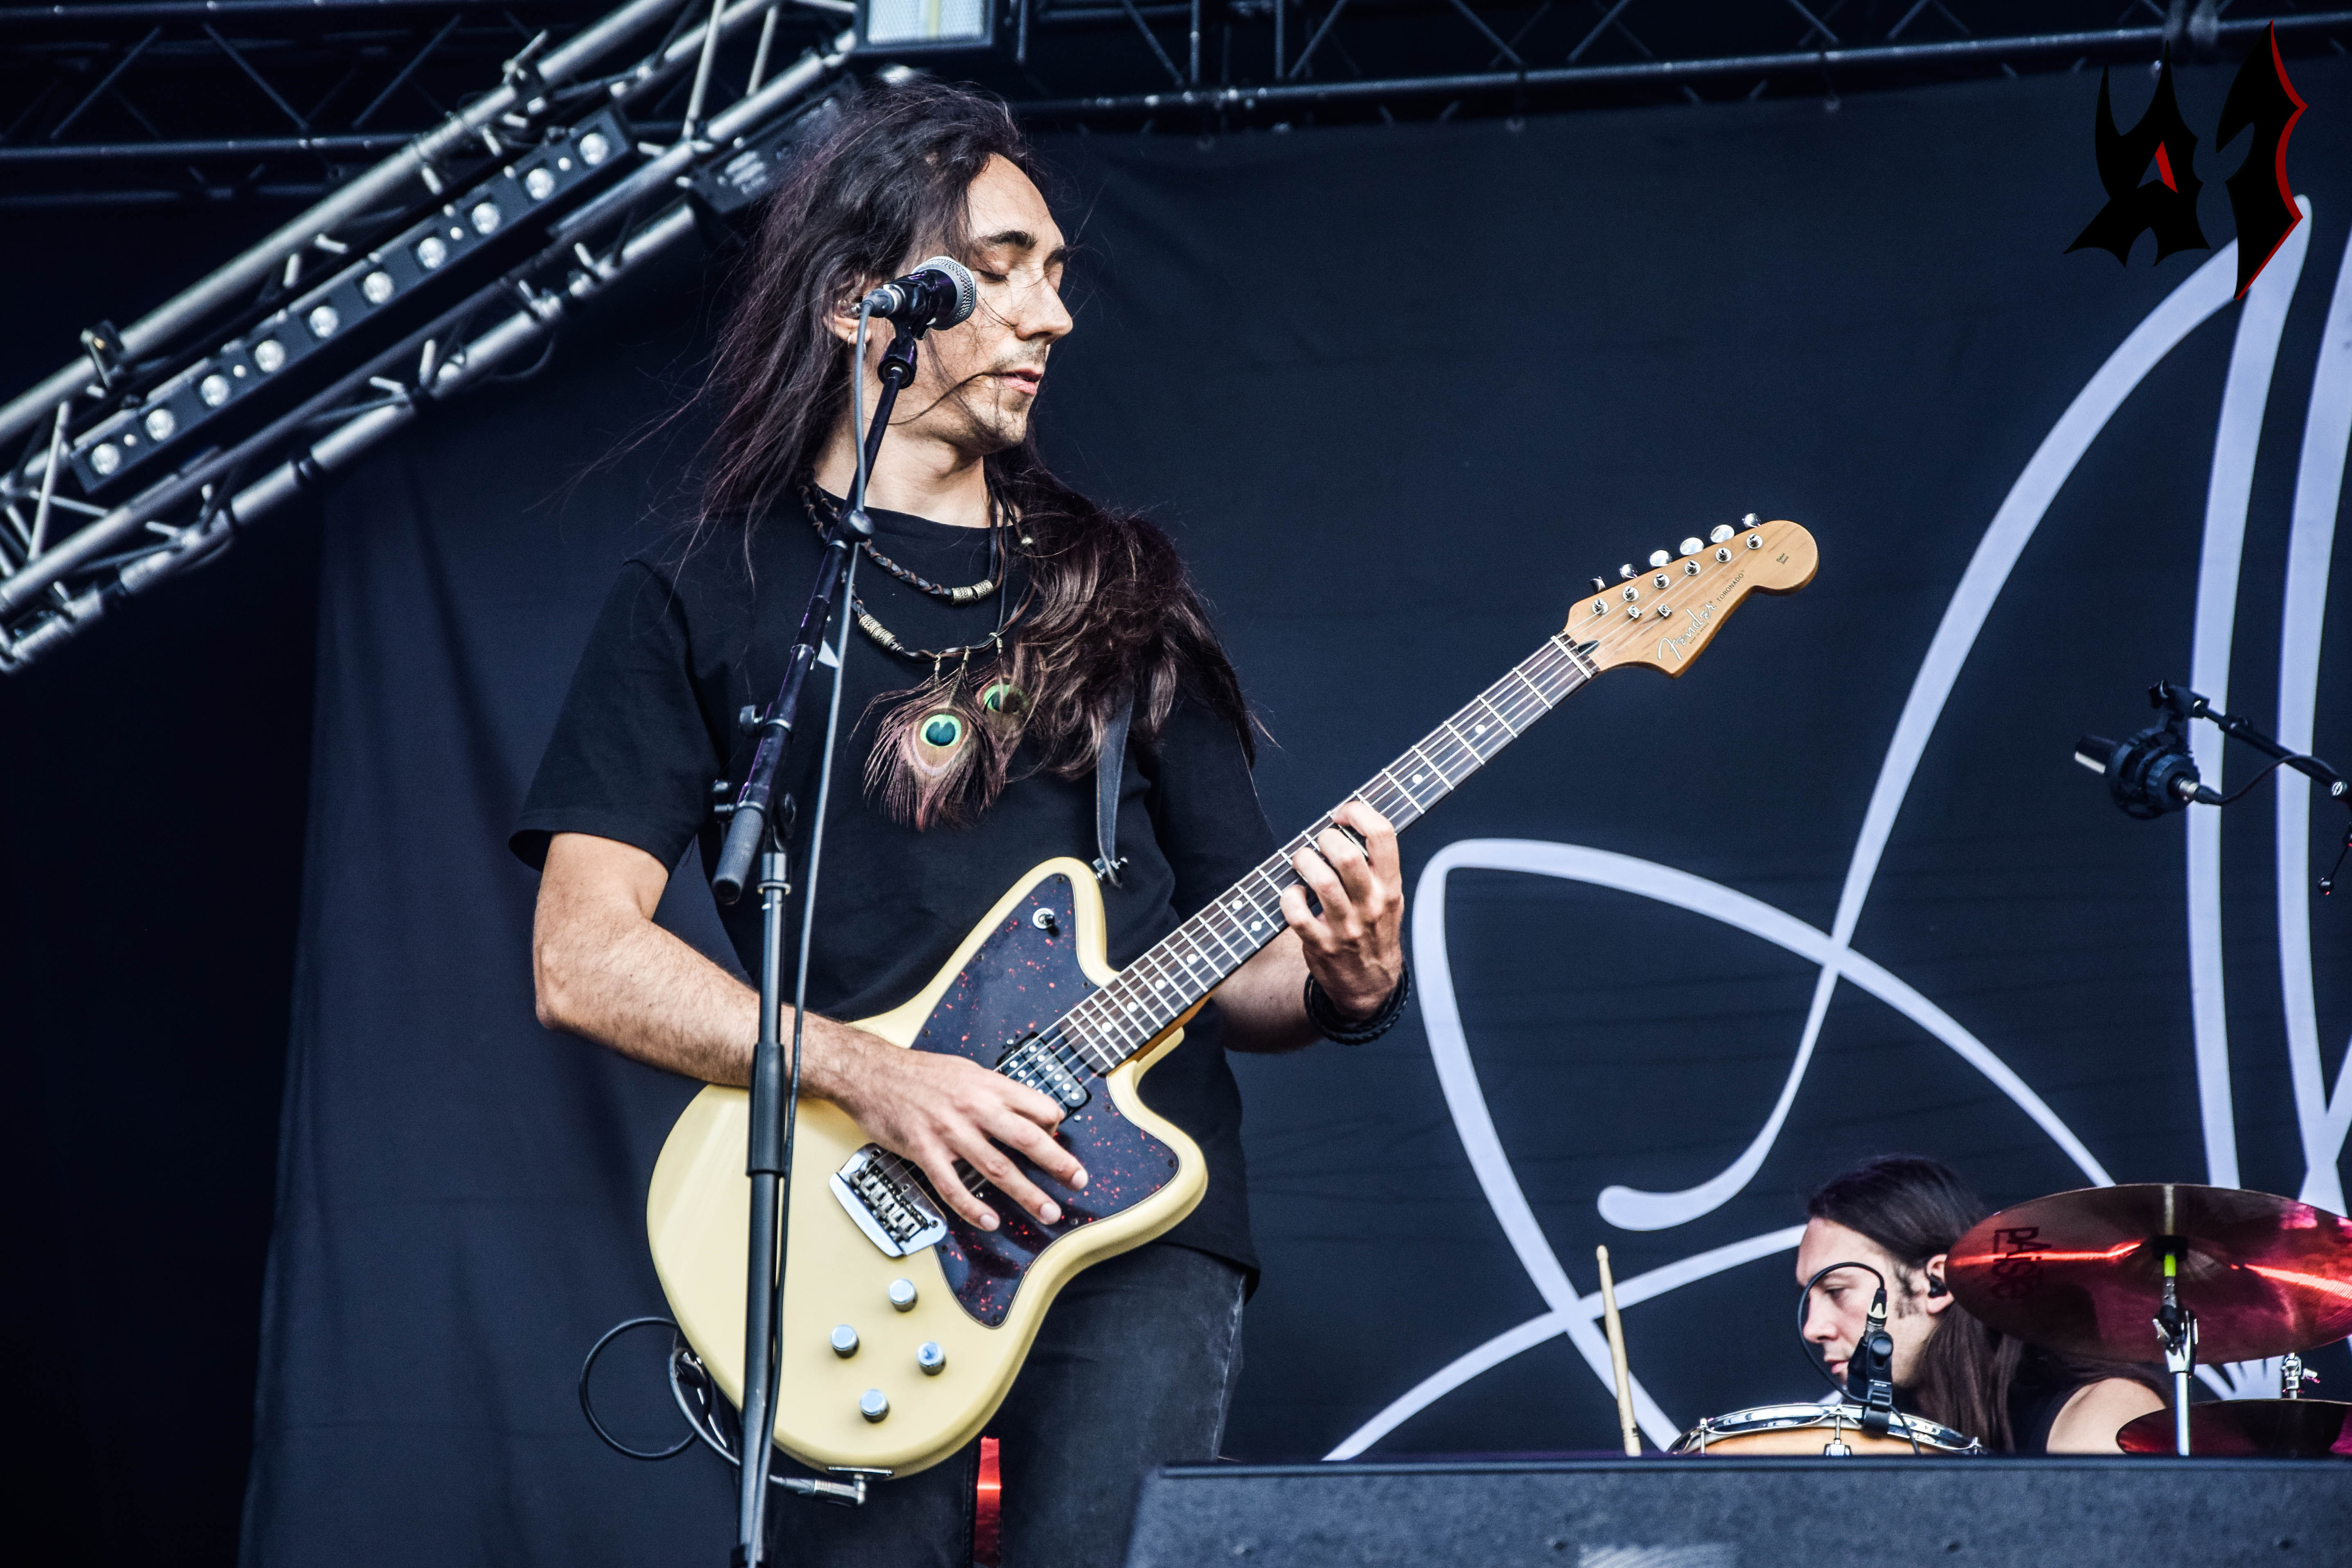 Donwload 2018 – Day 2 - Alcest 2